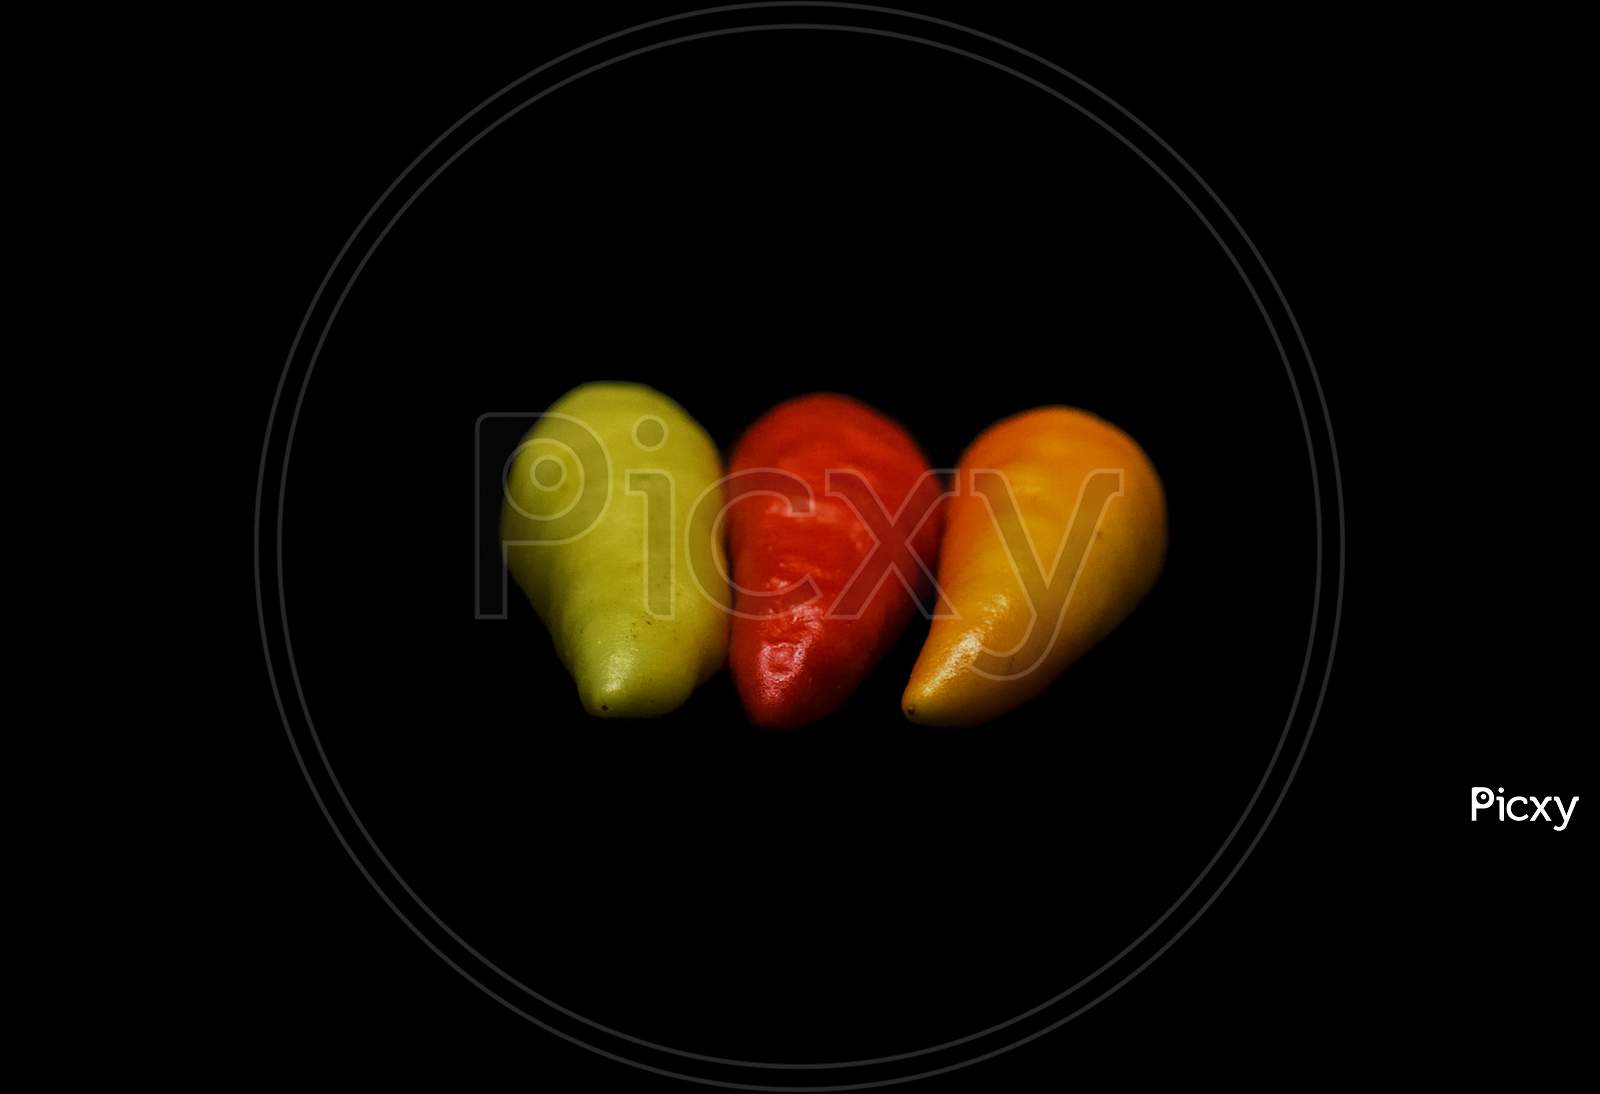 Three Colors Of Chillies In Black Background